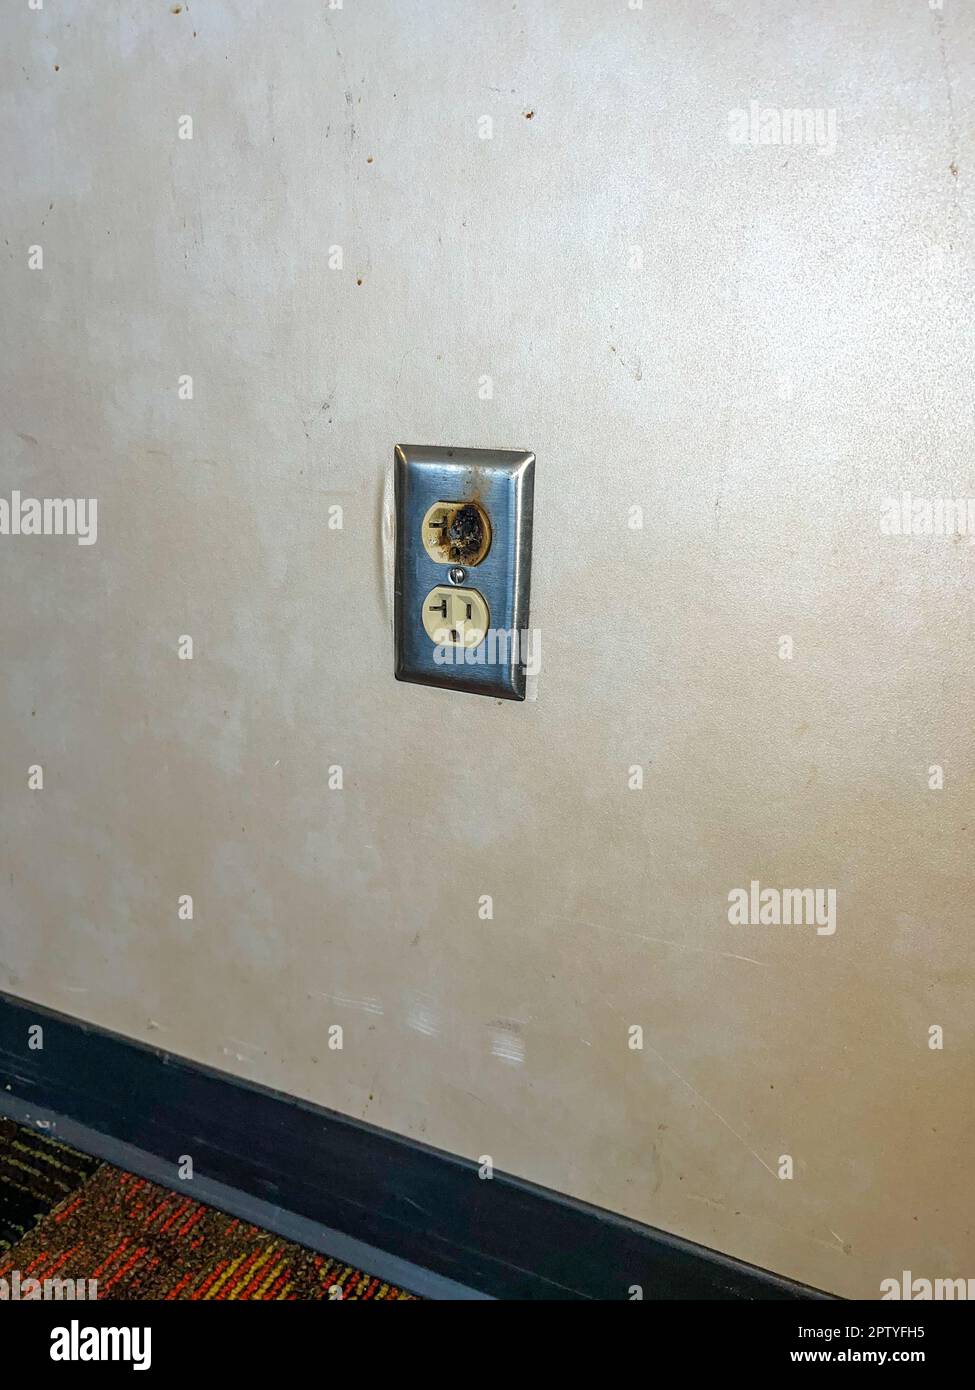 Damaged faulty electrical outlet on wall presented a hazard Stock Photo